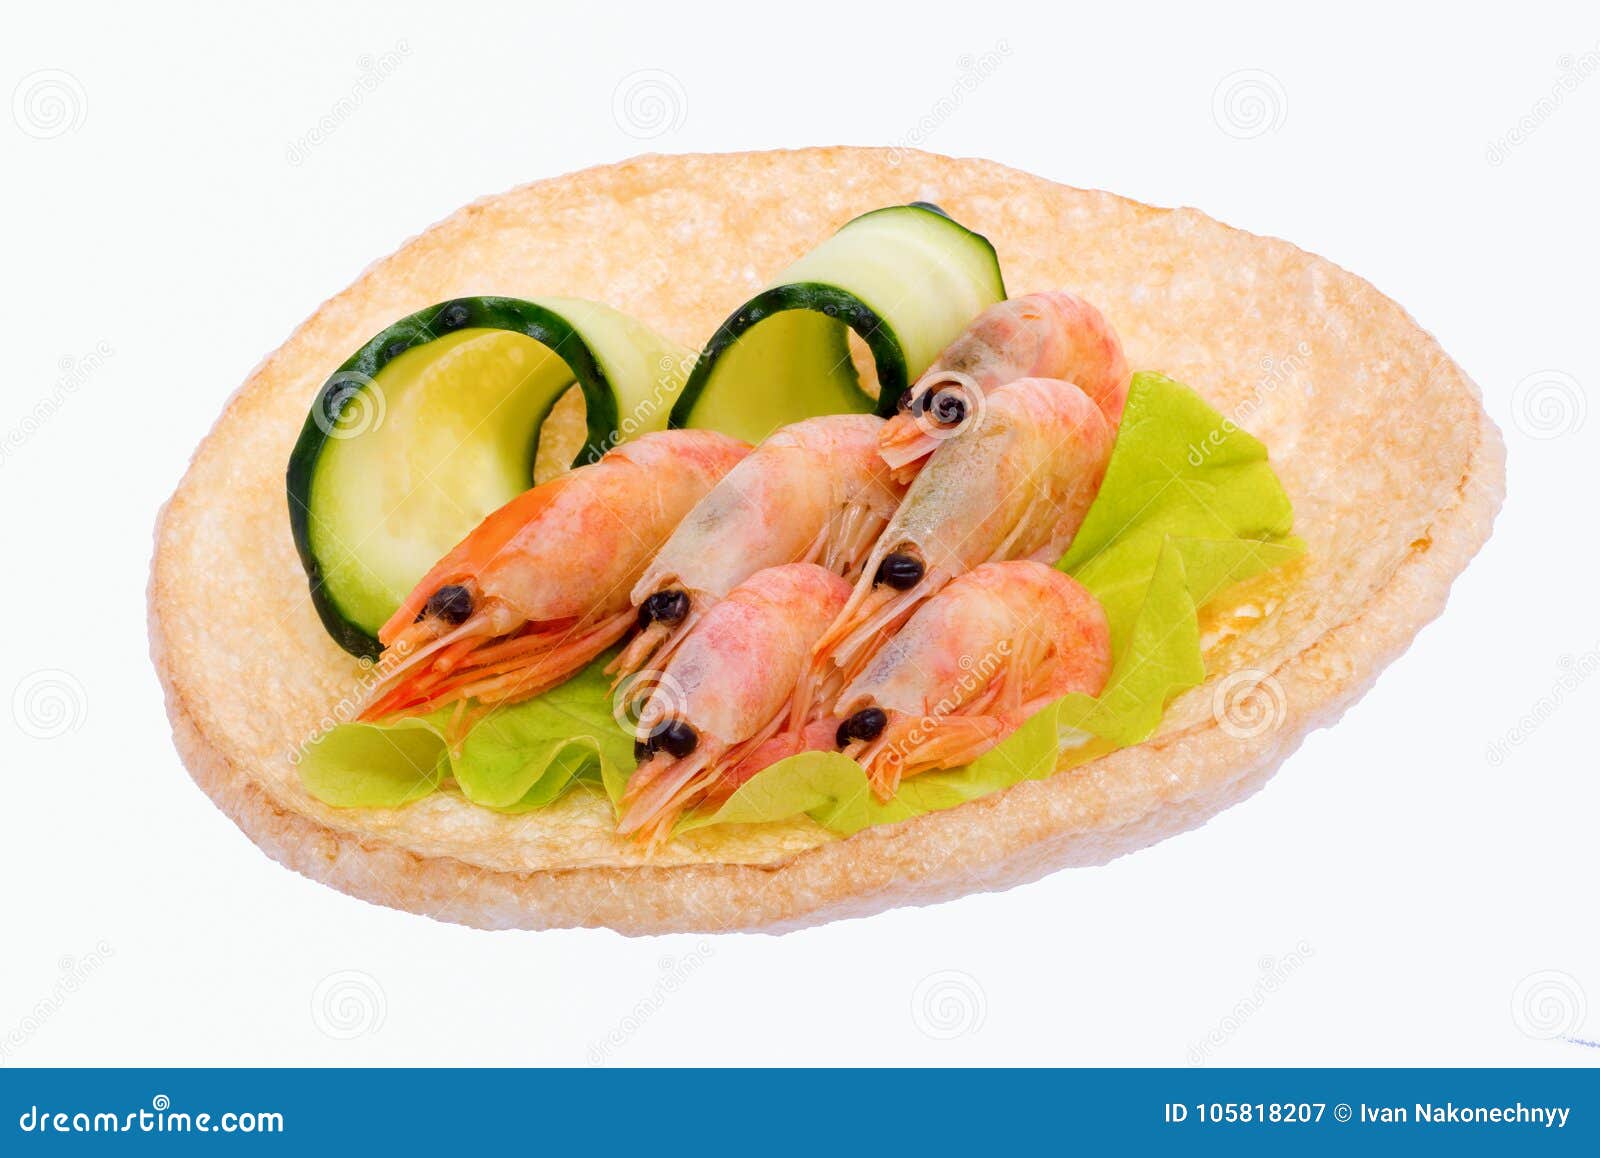 Sandwich with shrimps. stock image. Image of view, lunch - 105818207